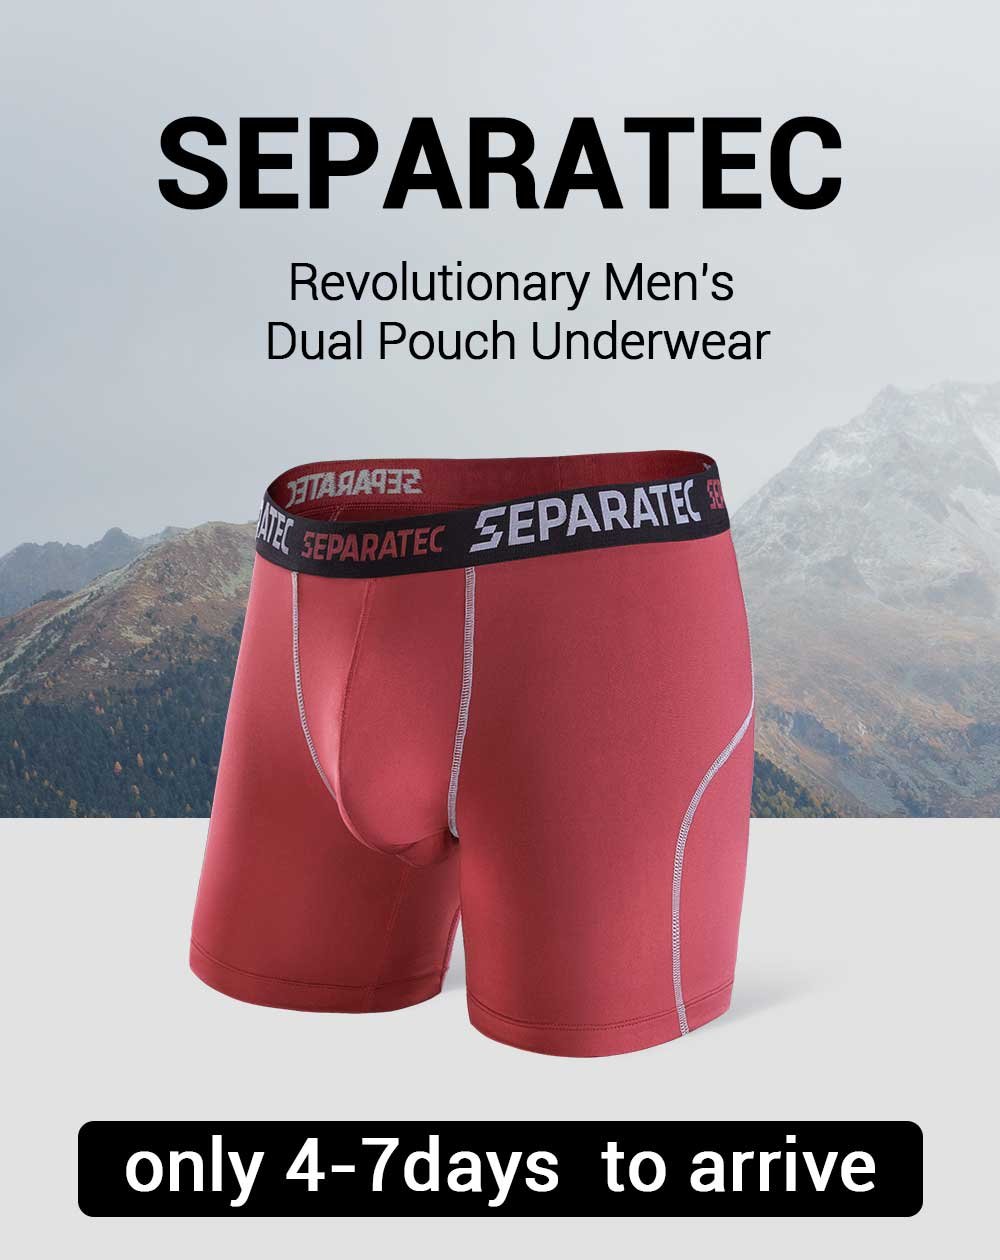 CYBREATH TECHNOLOGY CO., LIMITED: Dual Pouch Underwear Keeps Your Intimacy  Dry All Day